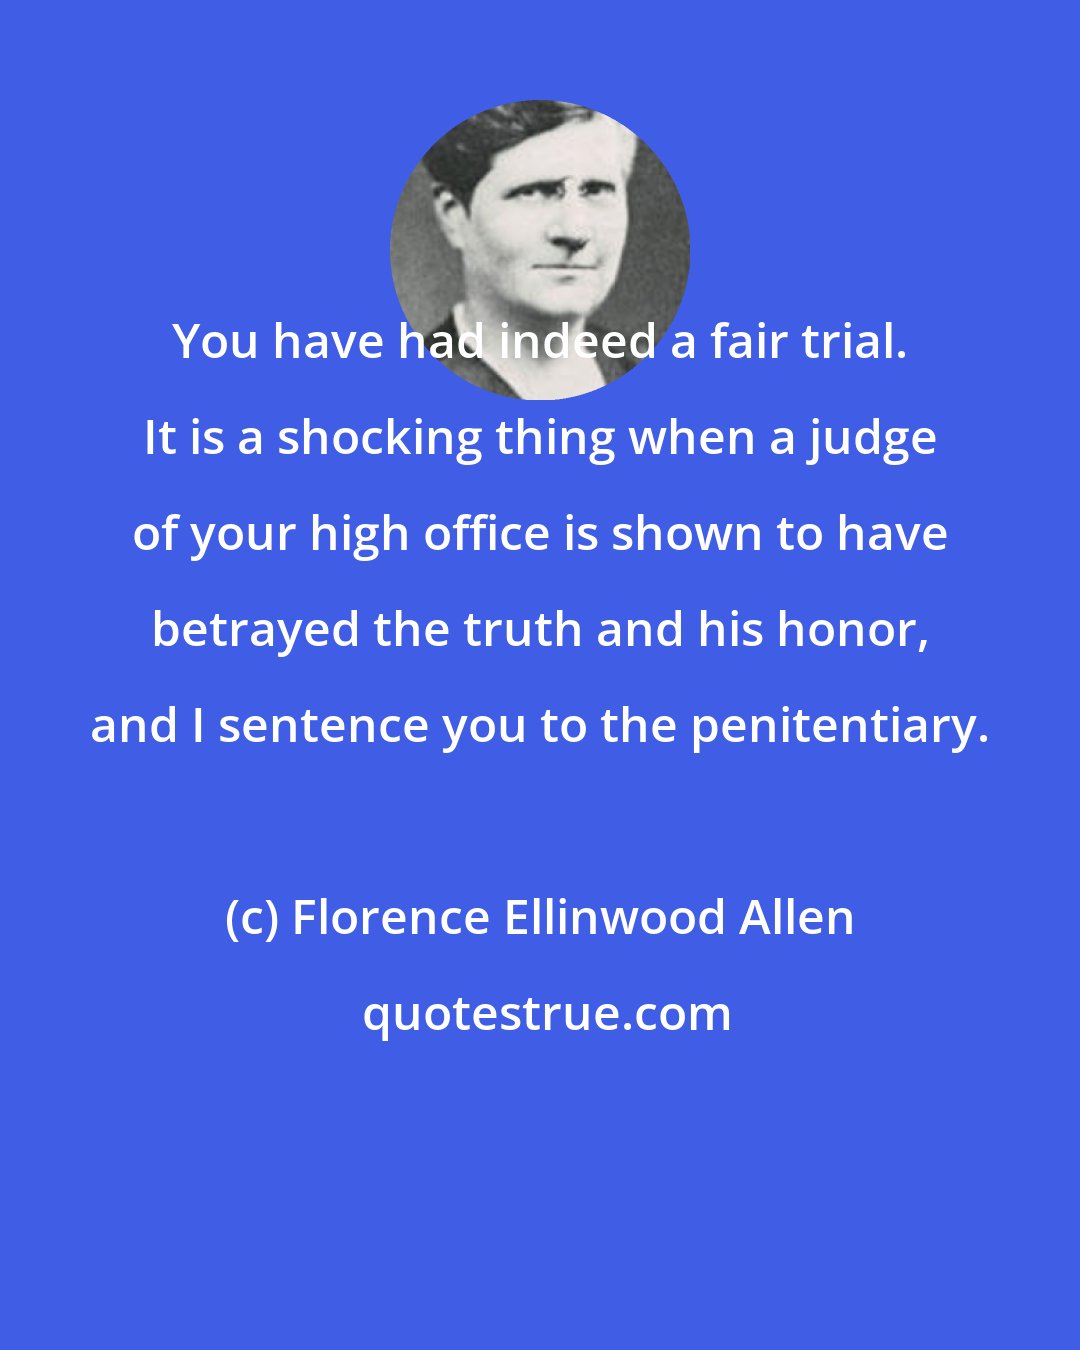 Florence Ellinwood Allen: You have had indeed a fair trial. It is a shocking thing when a judge of your high office is shown to have betrayed the truth and his honor, and I sentence you to the penitentiary.